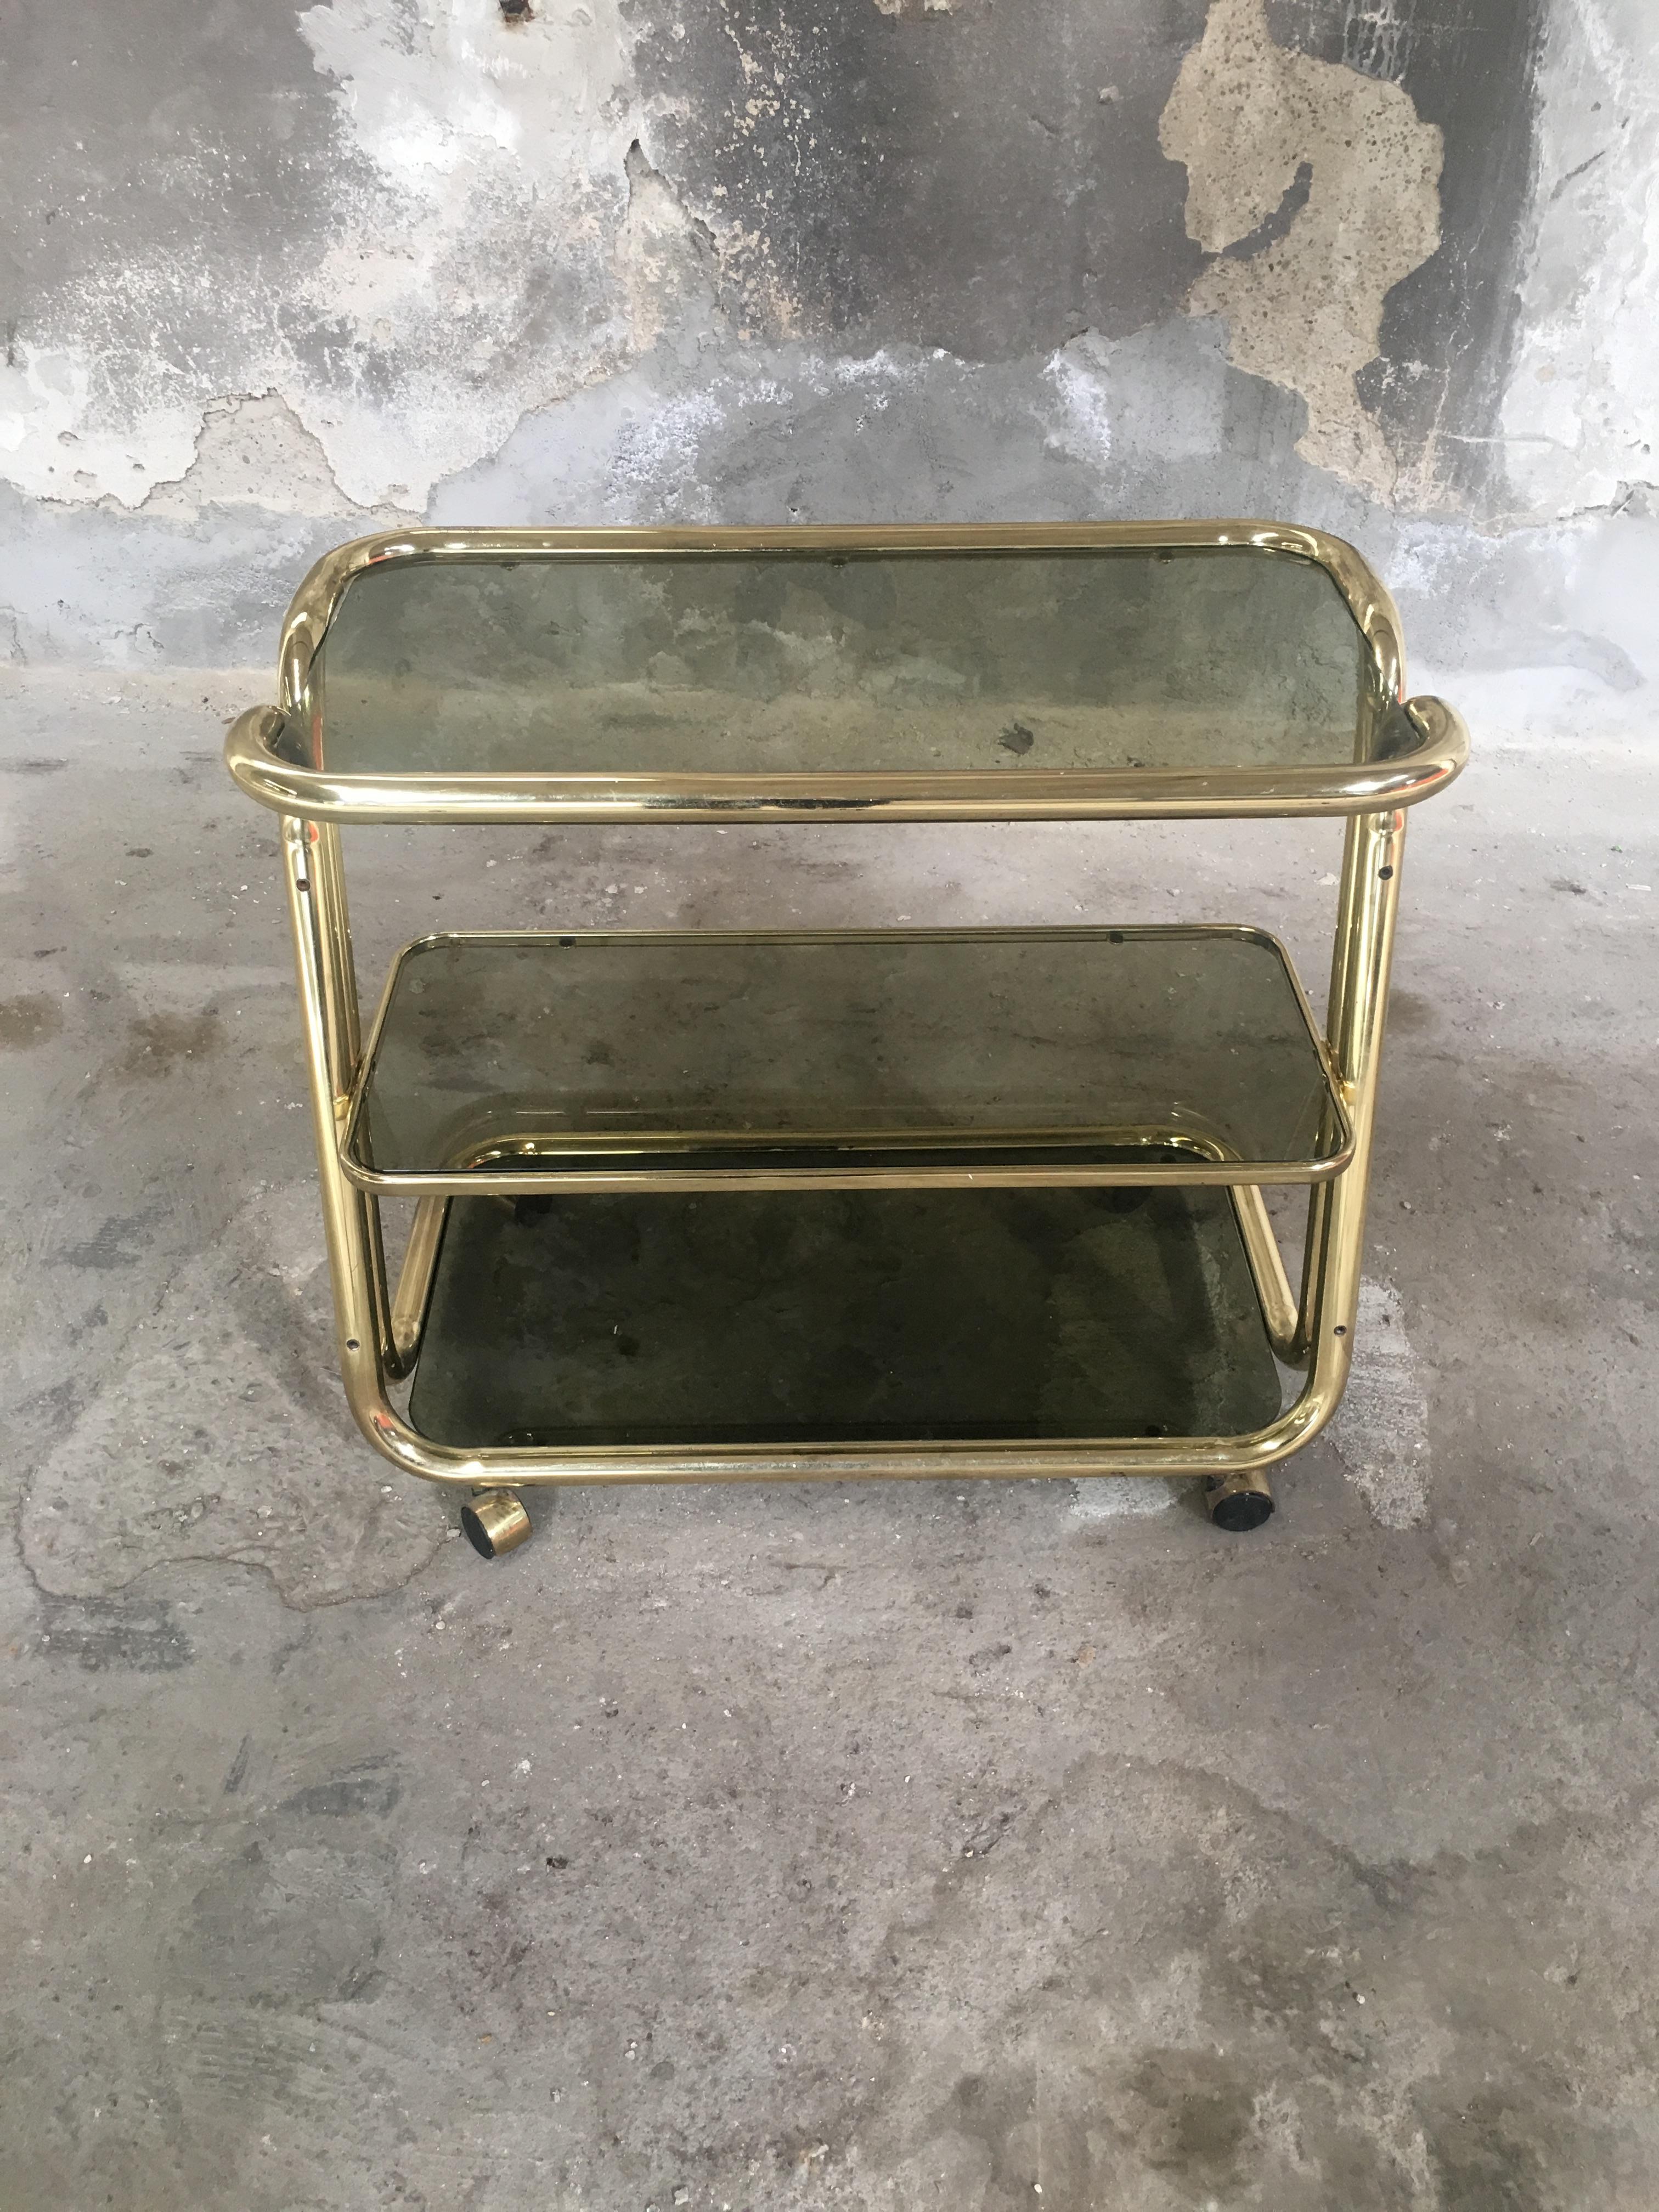 Gilt Midcentury Italian Brass Metal Bar Cart with Smoked Glass Shelves from 1970s